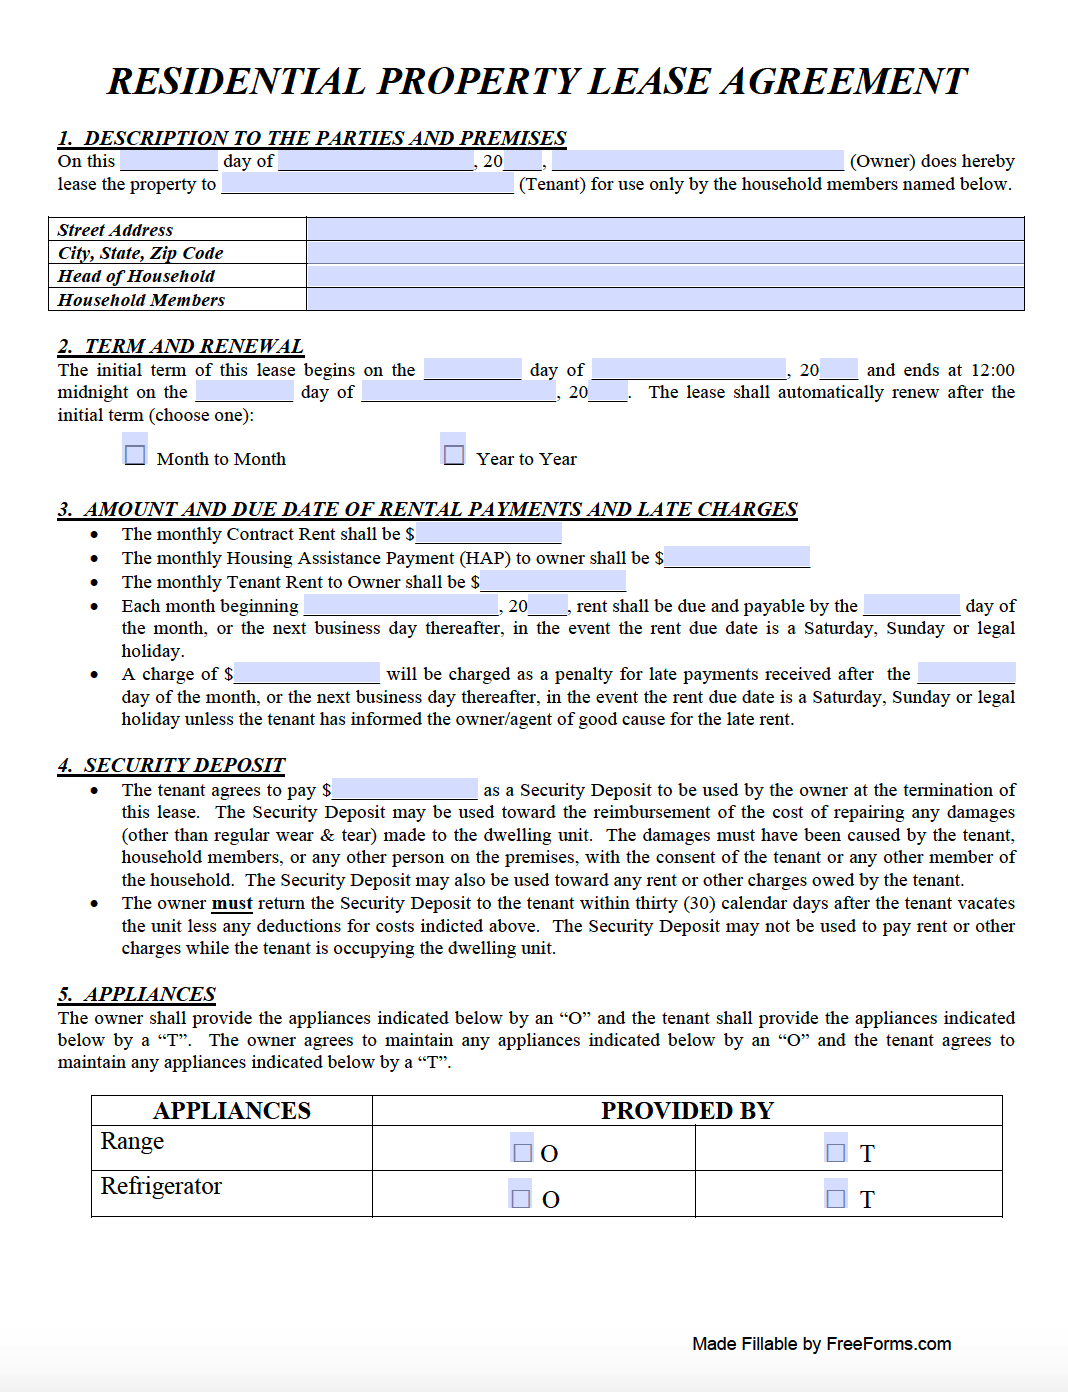 ohio-residential-lease-agreement-template